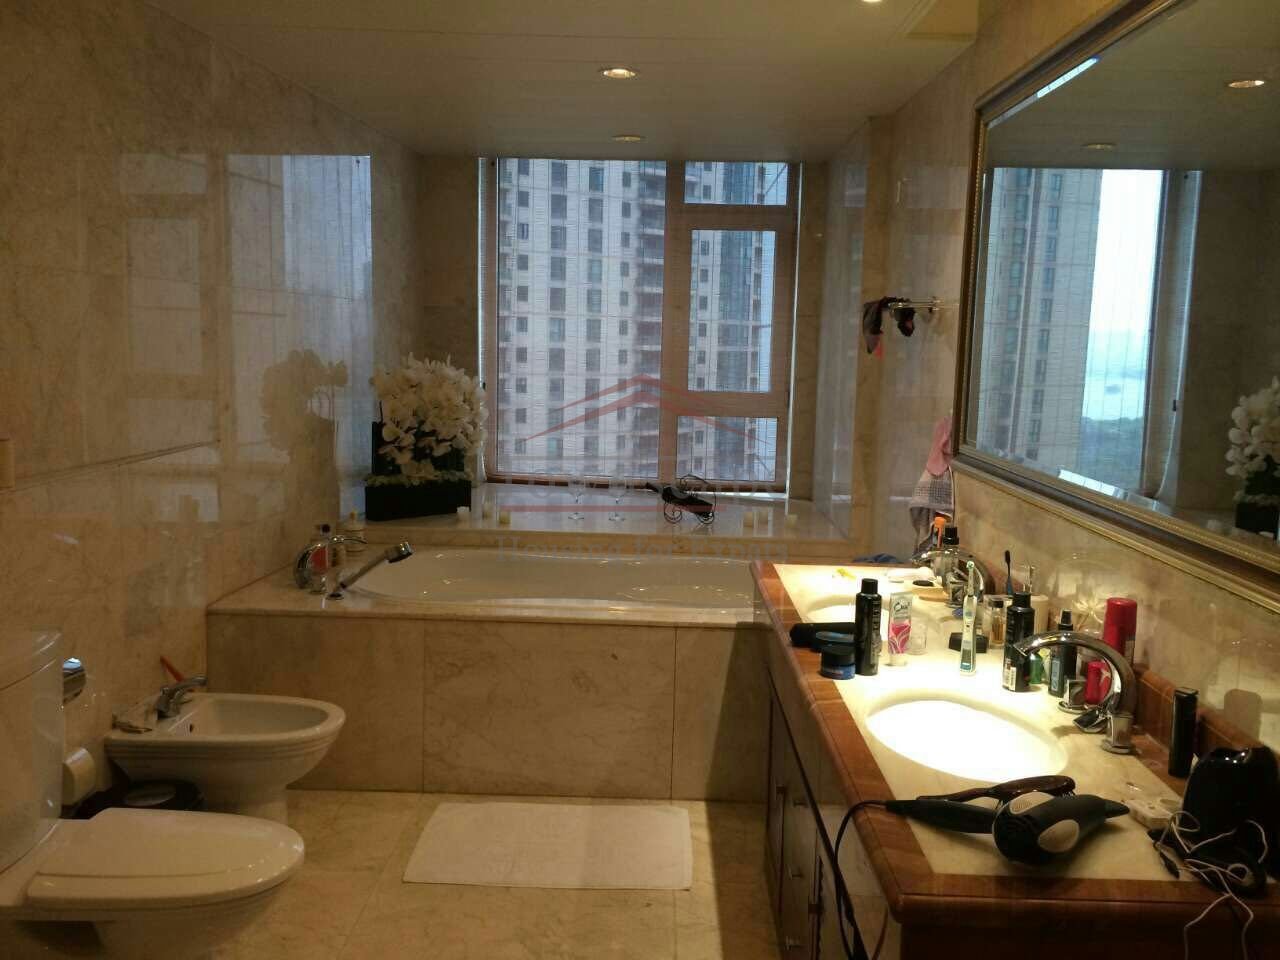 Rent apartment in shanghai Large 3 BR Apartment in exclusive Skyline mansion Pudong